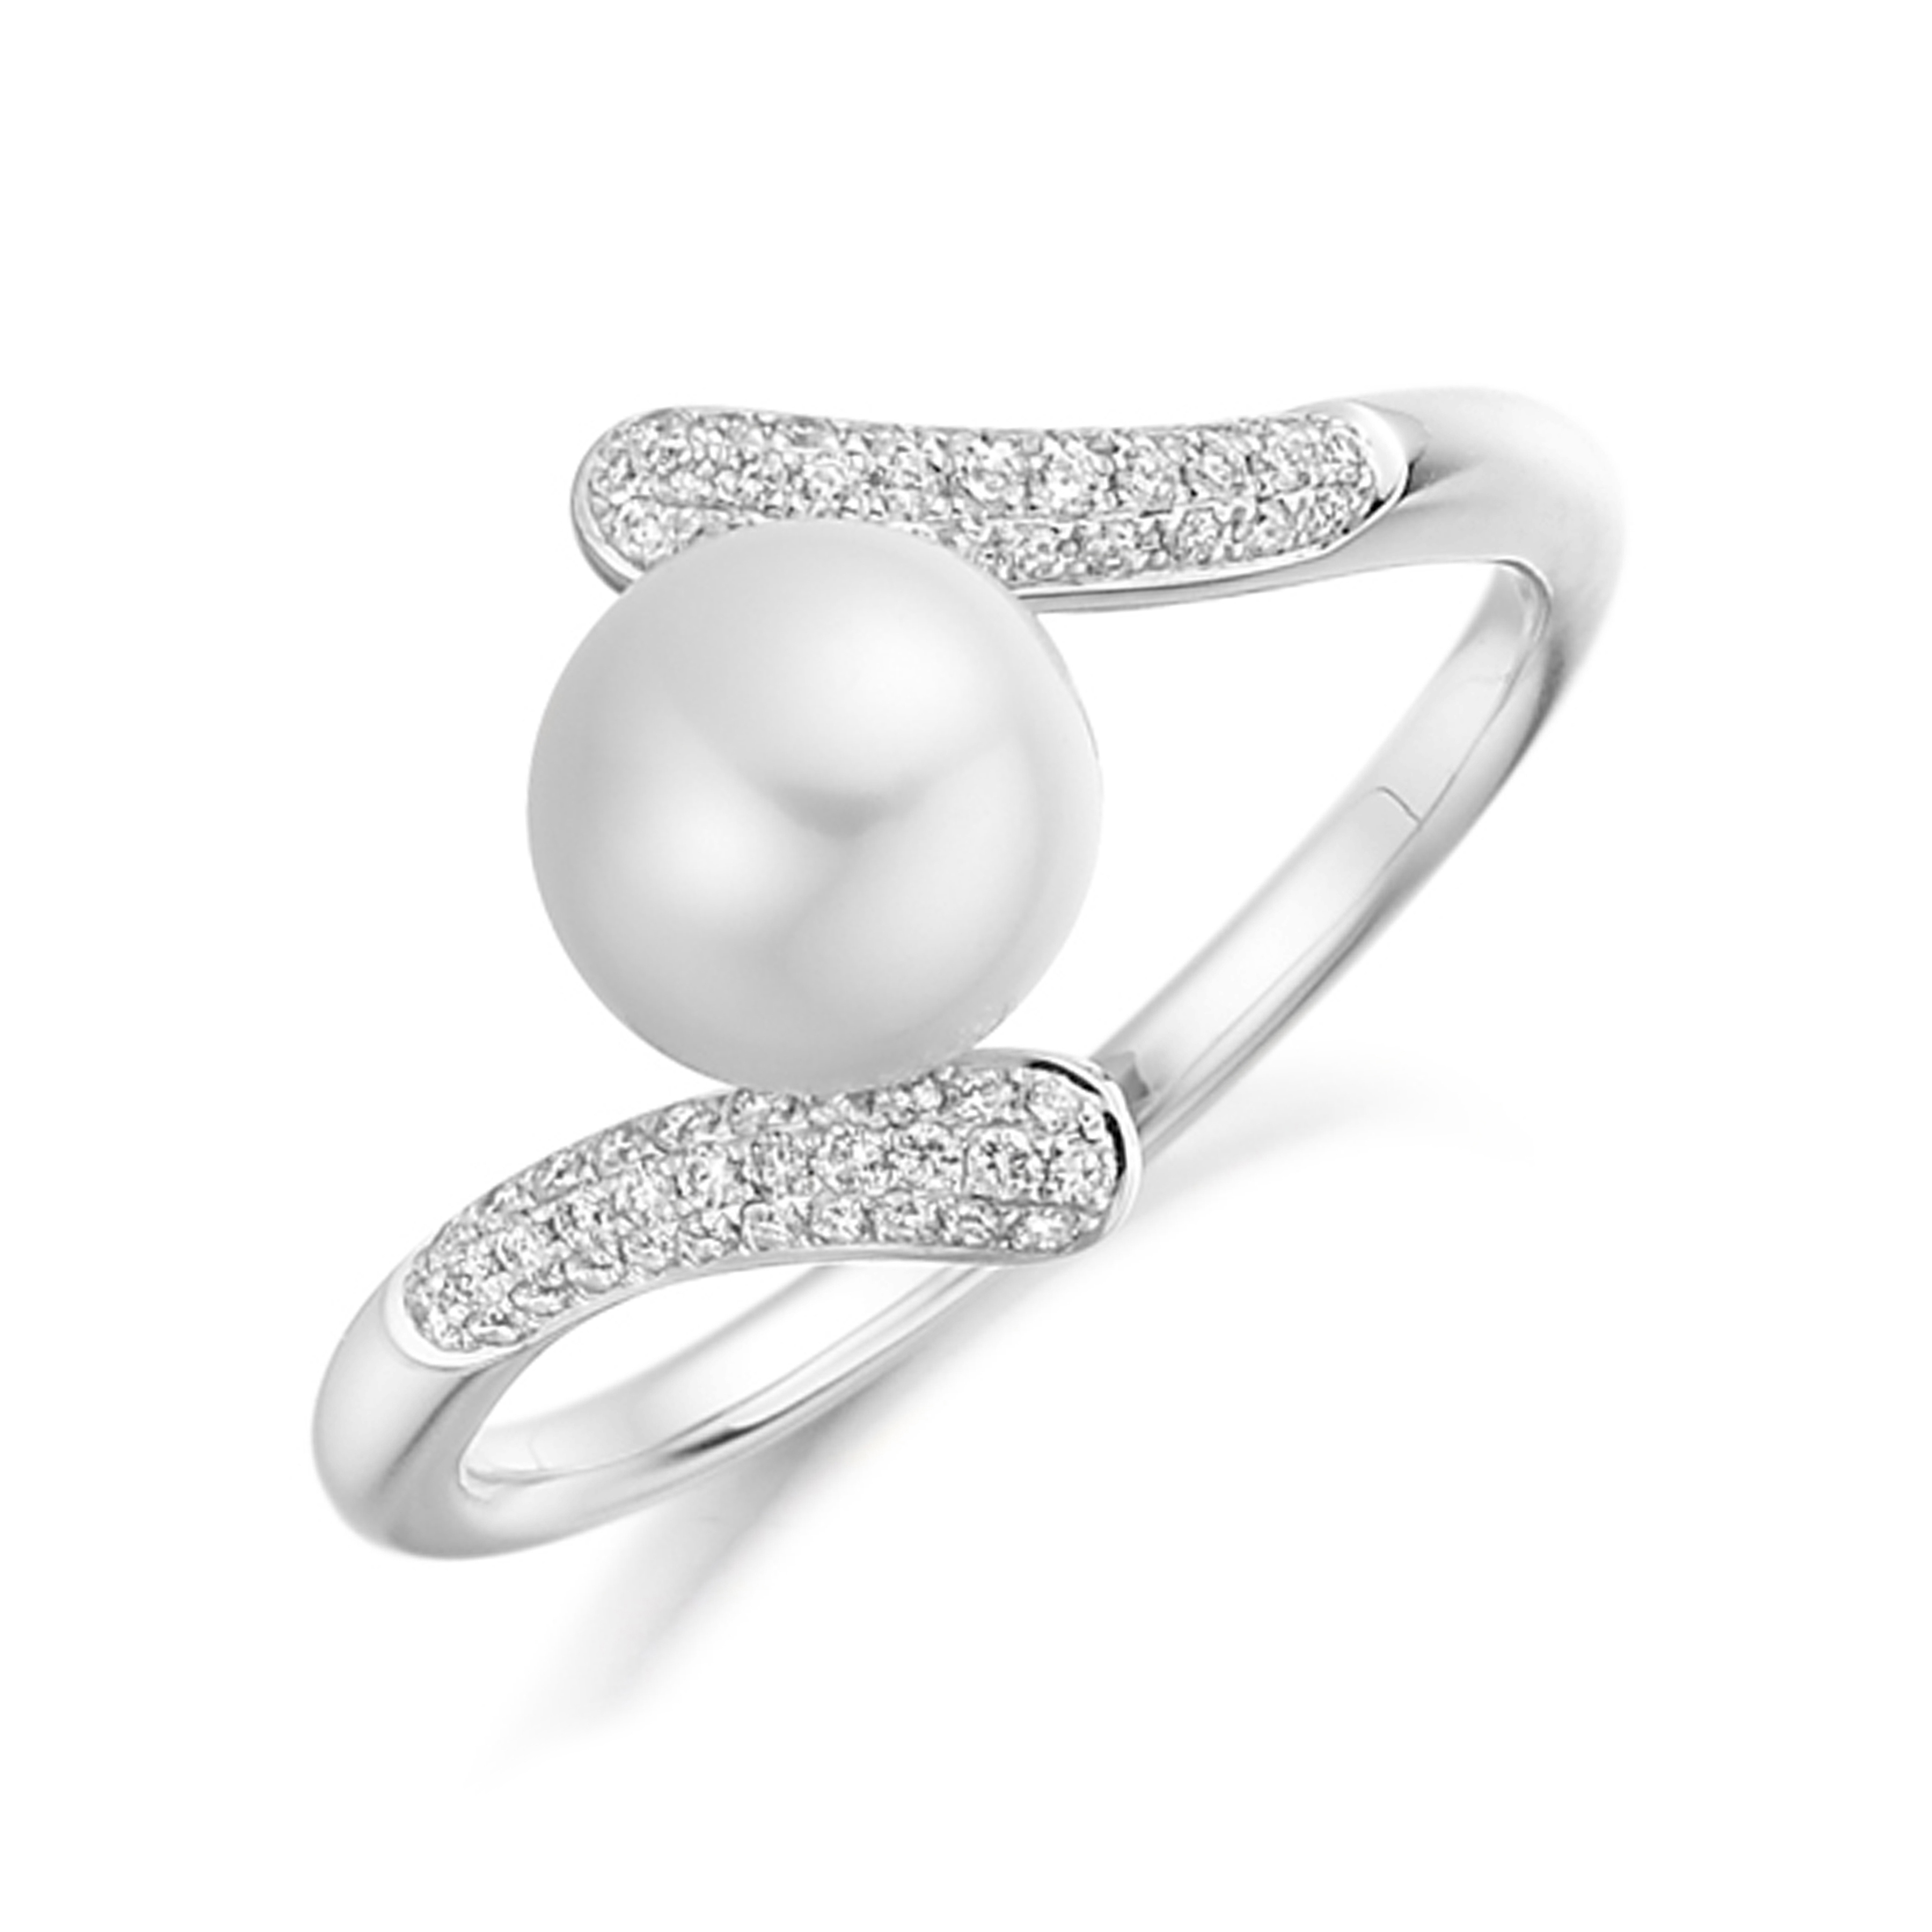 7mm Round Pearl Multiple Stones Diamond And Pearl Ring